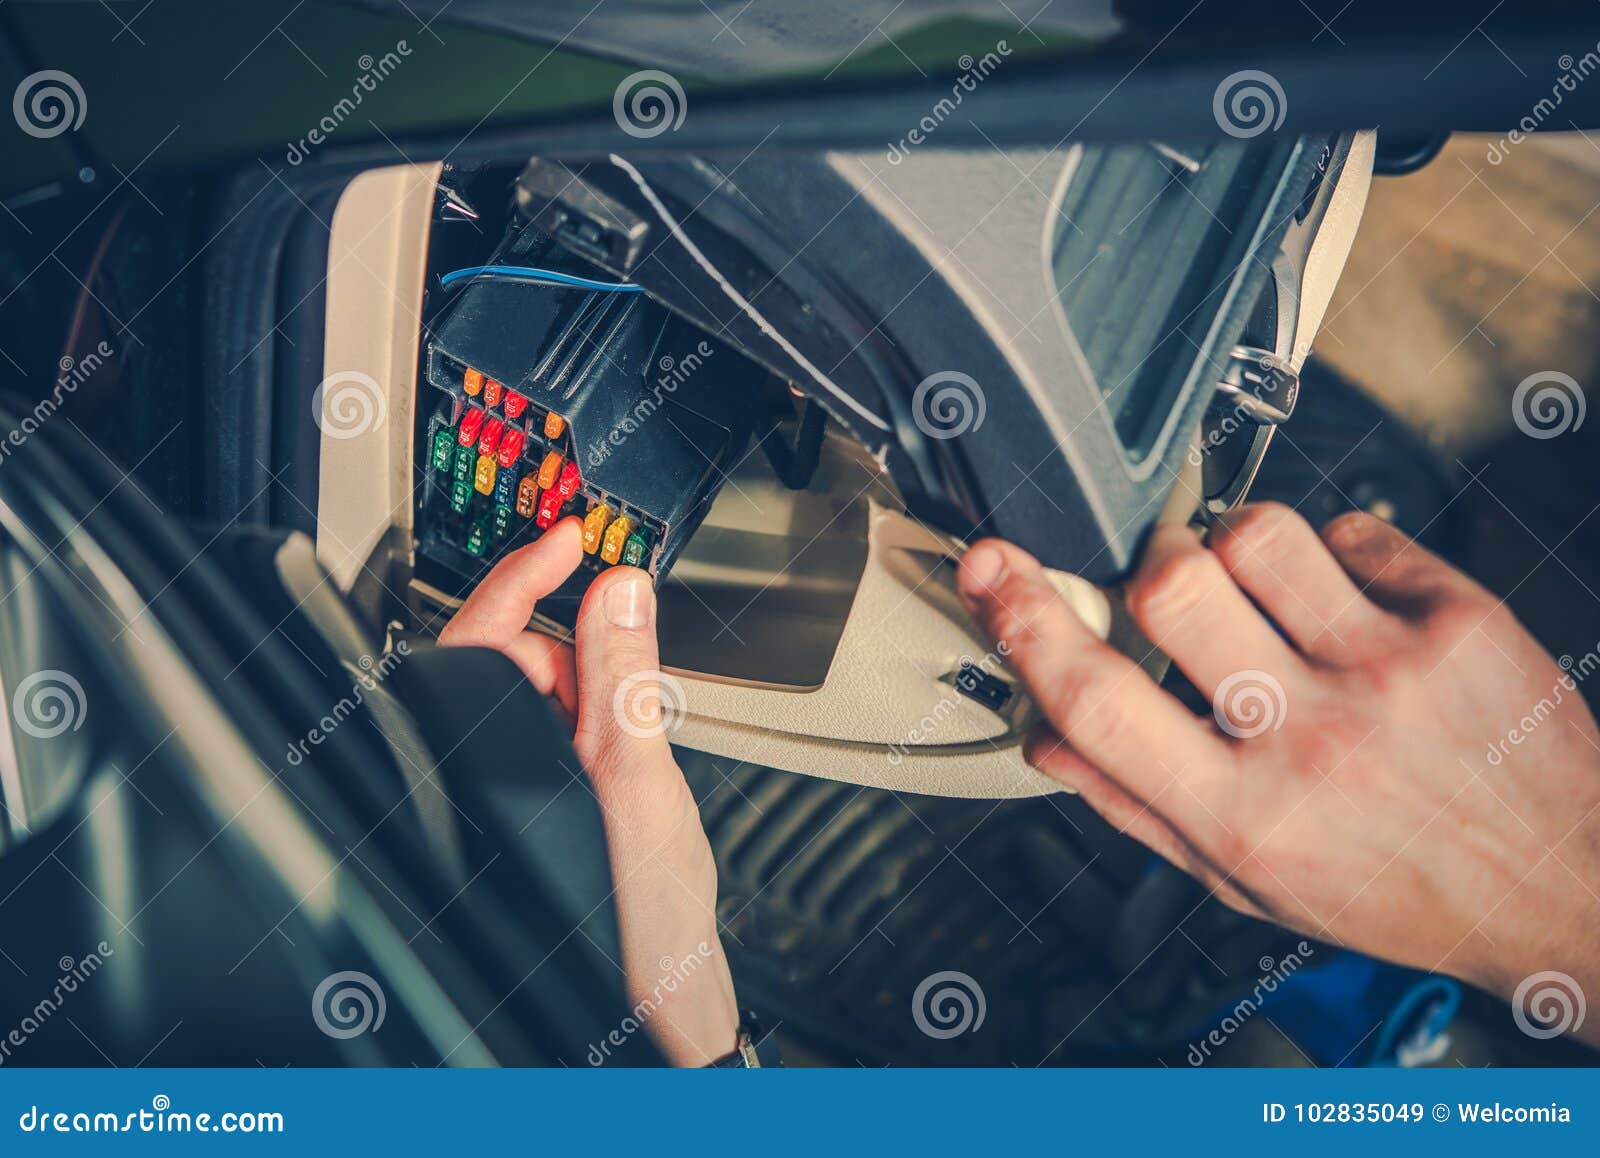 Checking Car Fuses stock image. Image of fixing, servicing - 102835049 How To Fix A Broken Fuse Holder In Car